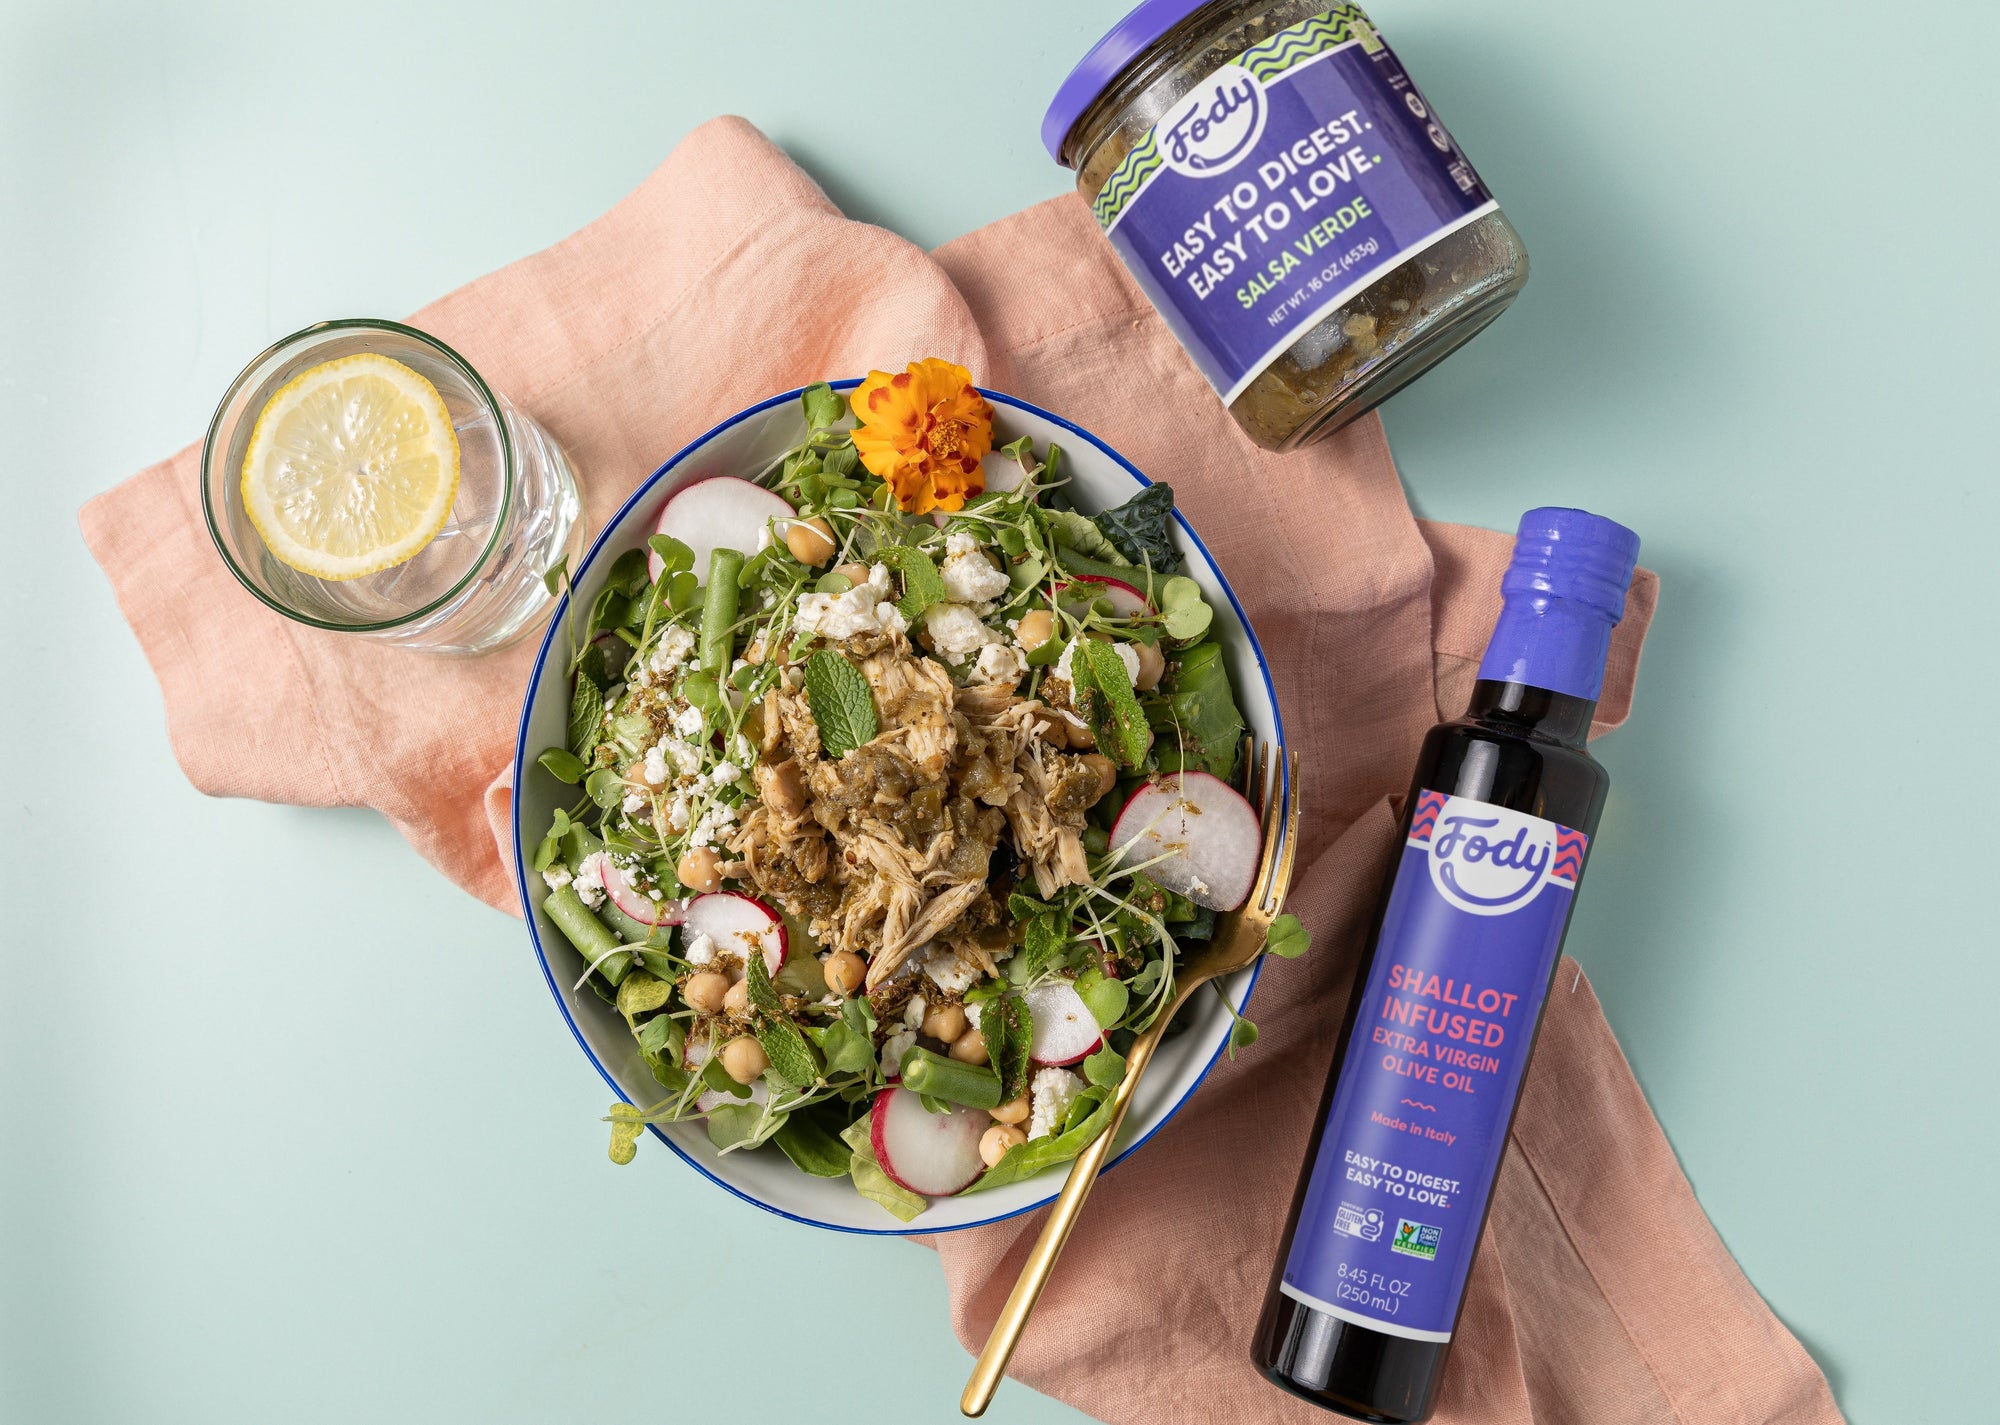 An image of Fody’s Spring Greens Salad with Slow Cooker Salsa Verde Chicken in a bowl on a light turquoise table beside bottles of Fody's olive oil and Fody's salsa verde.